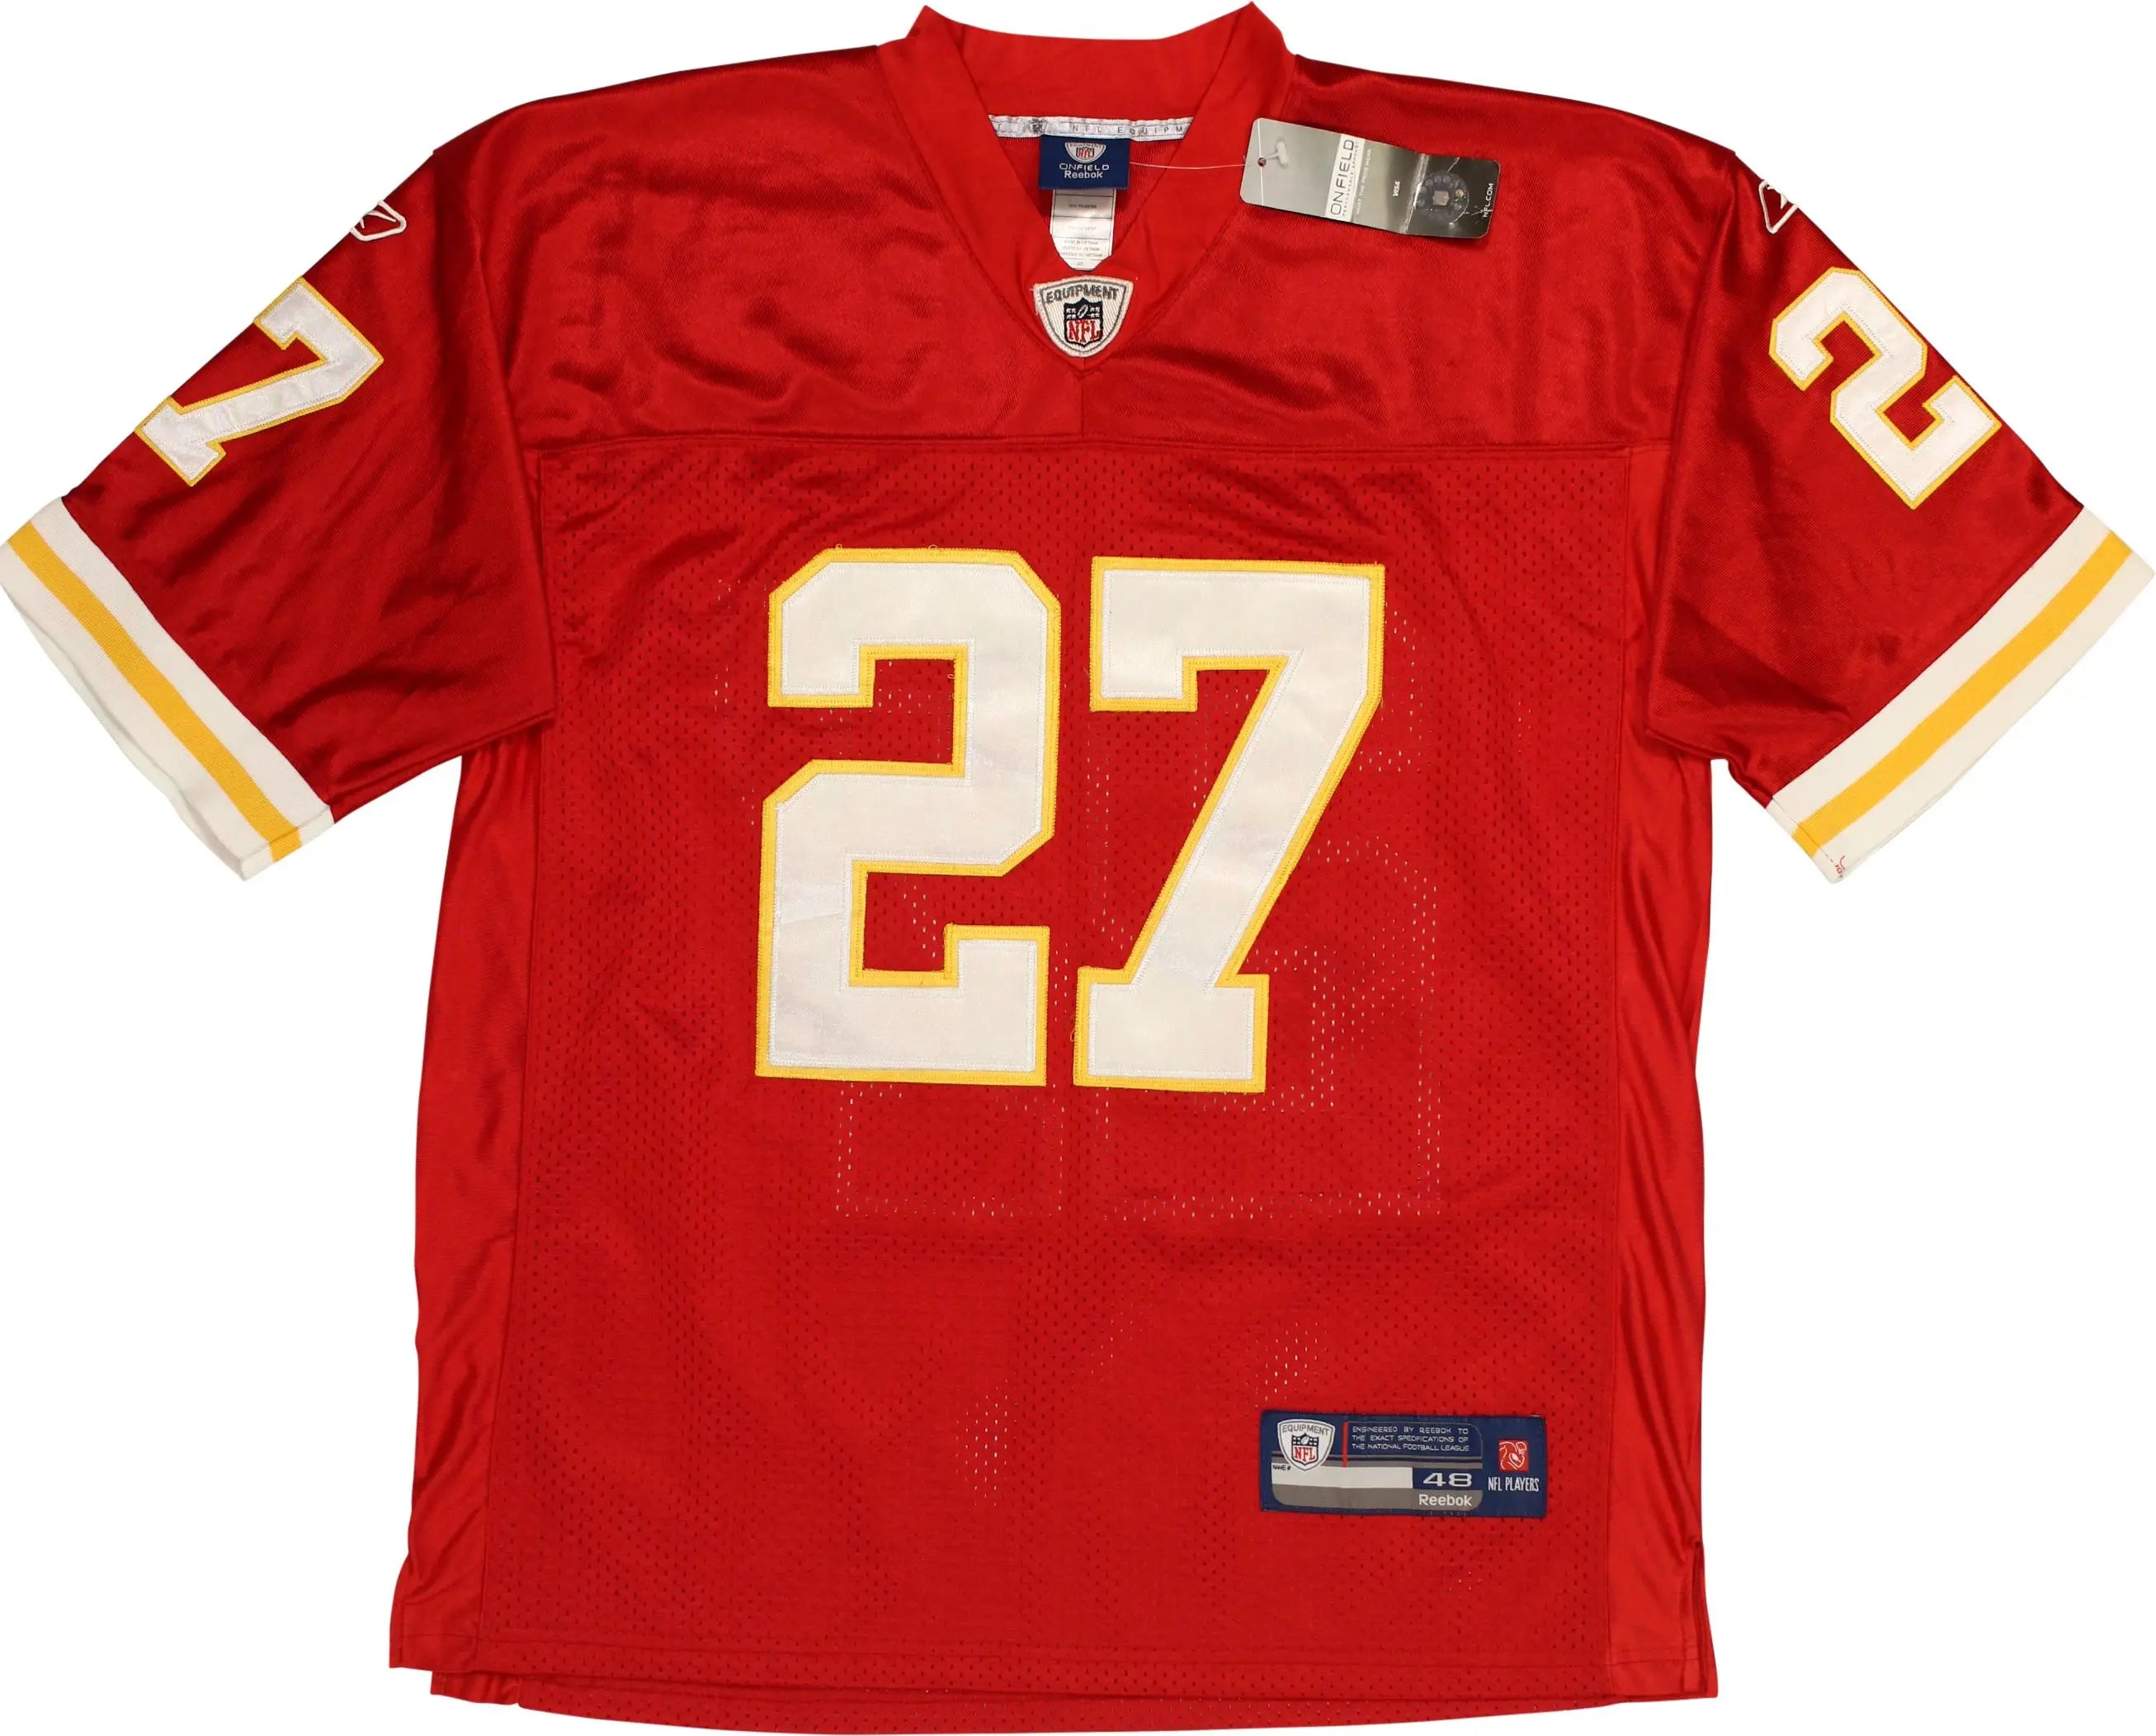 NFL - Kansas City Chieft NFL Jersey by Reebok- ThriftTale.com - Vintage and second handclothing